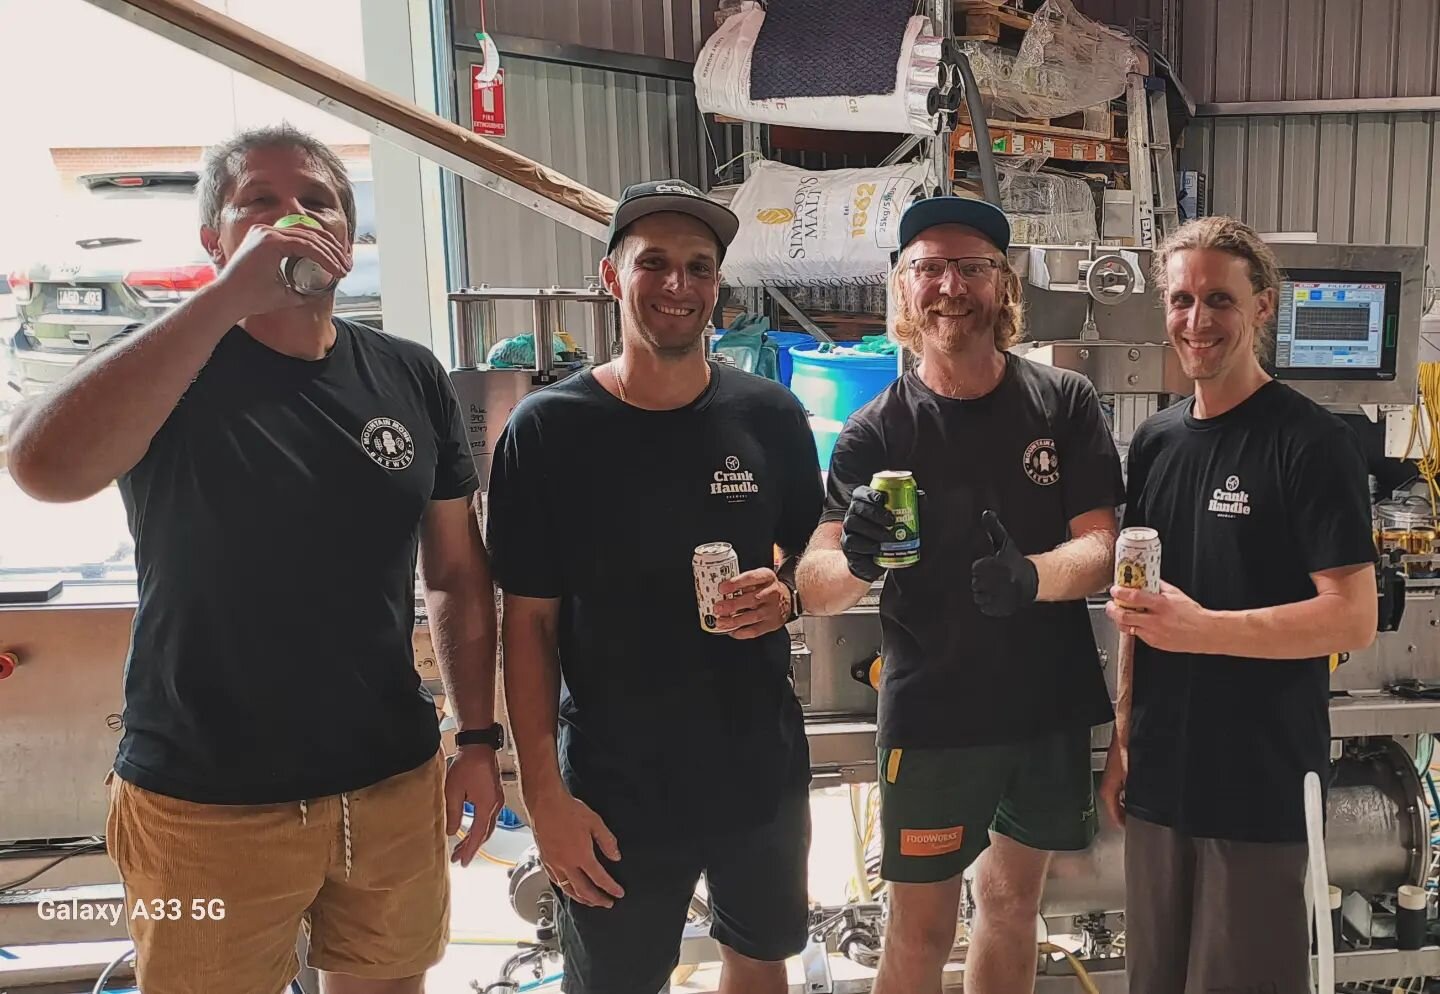 Upper Kiewa Valley High Country Brewers represent!! 👊 Great day canning our amazing beers together👍😁🍻🤟 #highcountryhopsfestival #highcountry #brewerytrail #tourismnortheast #crankhandlebrewery #mountainmonkbrewers #highcountrybrewerytrail #visit